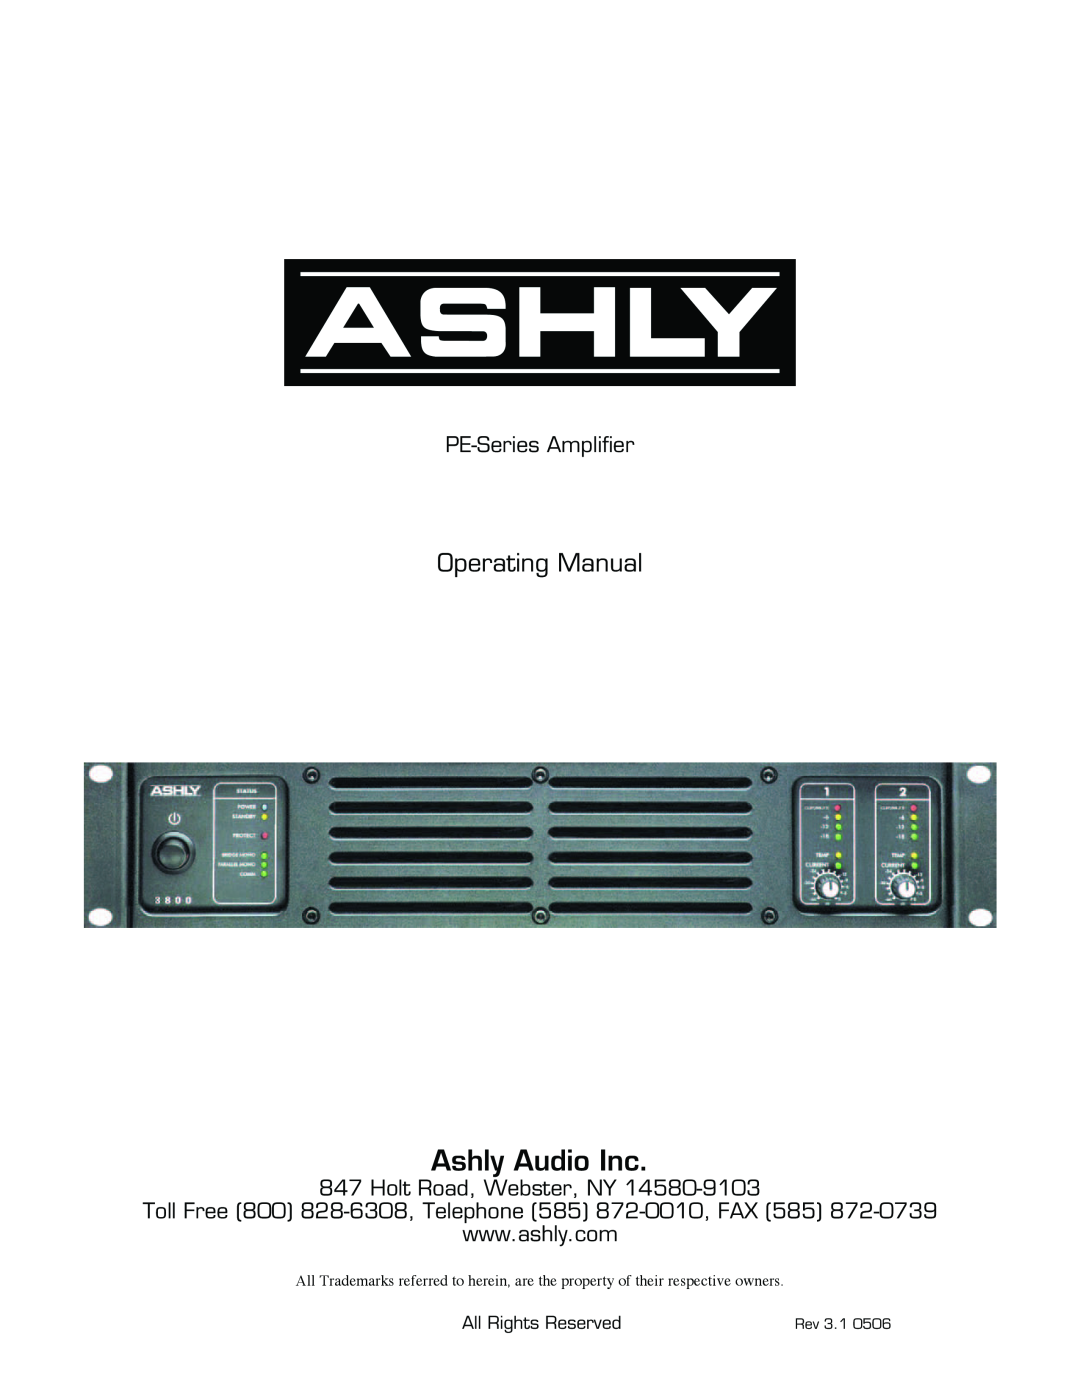 Ashly manual Operating Manual, PE-SeriesAmplifier, Holt Road, Webster, NY, Ashly Audio Inc, All Rights Reserved 